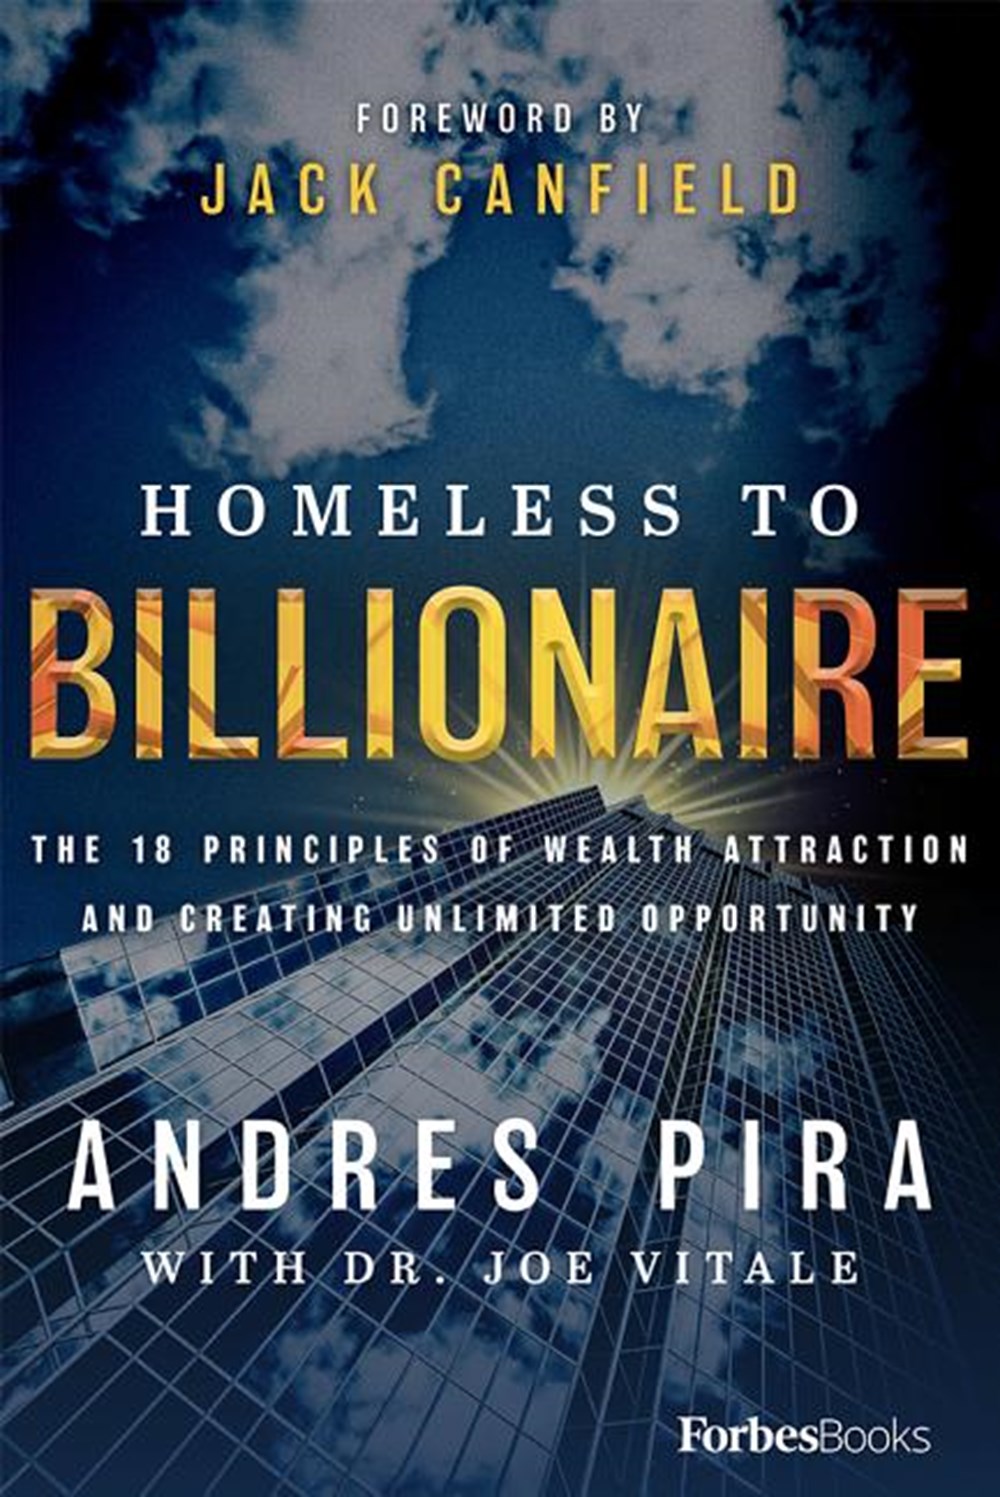 Homeless to Billionaire The 18 Principles of Wealth Attraction and Creating Unlimited Opportunity